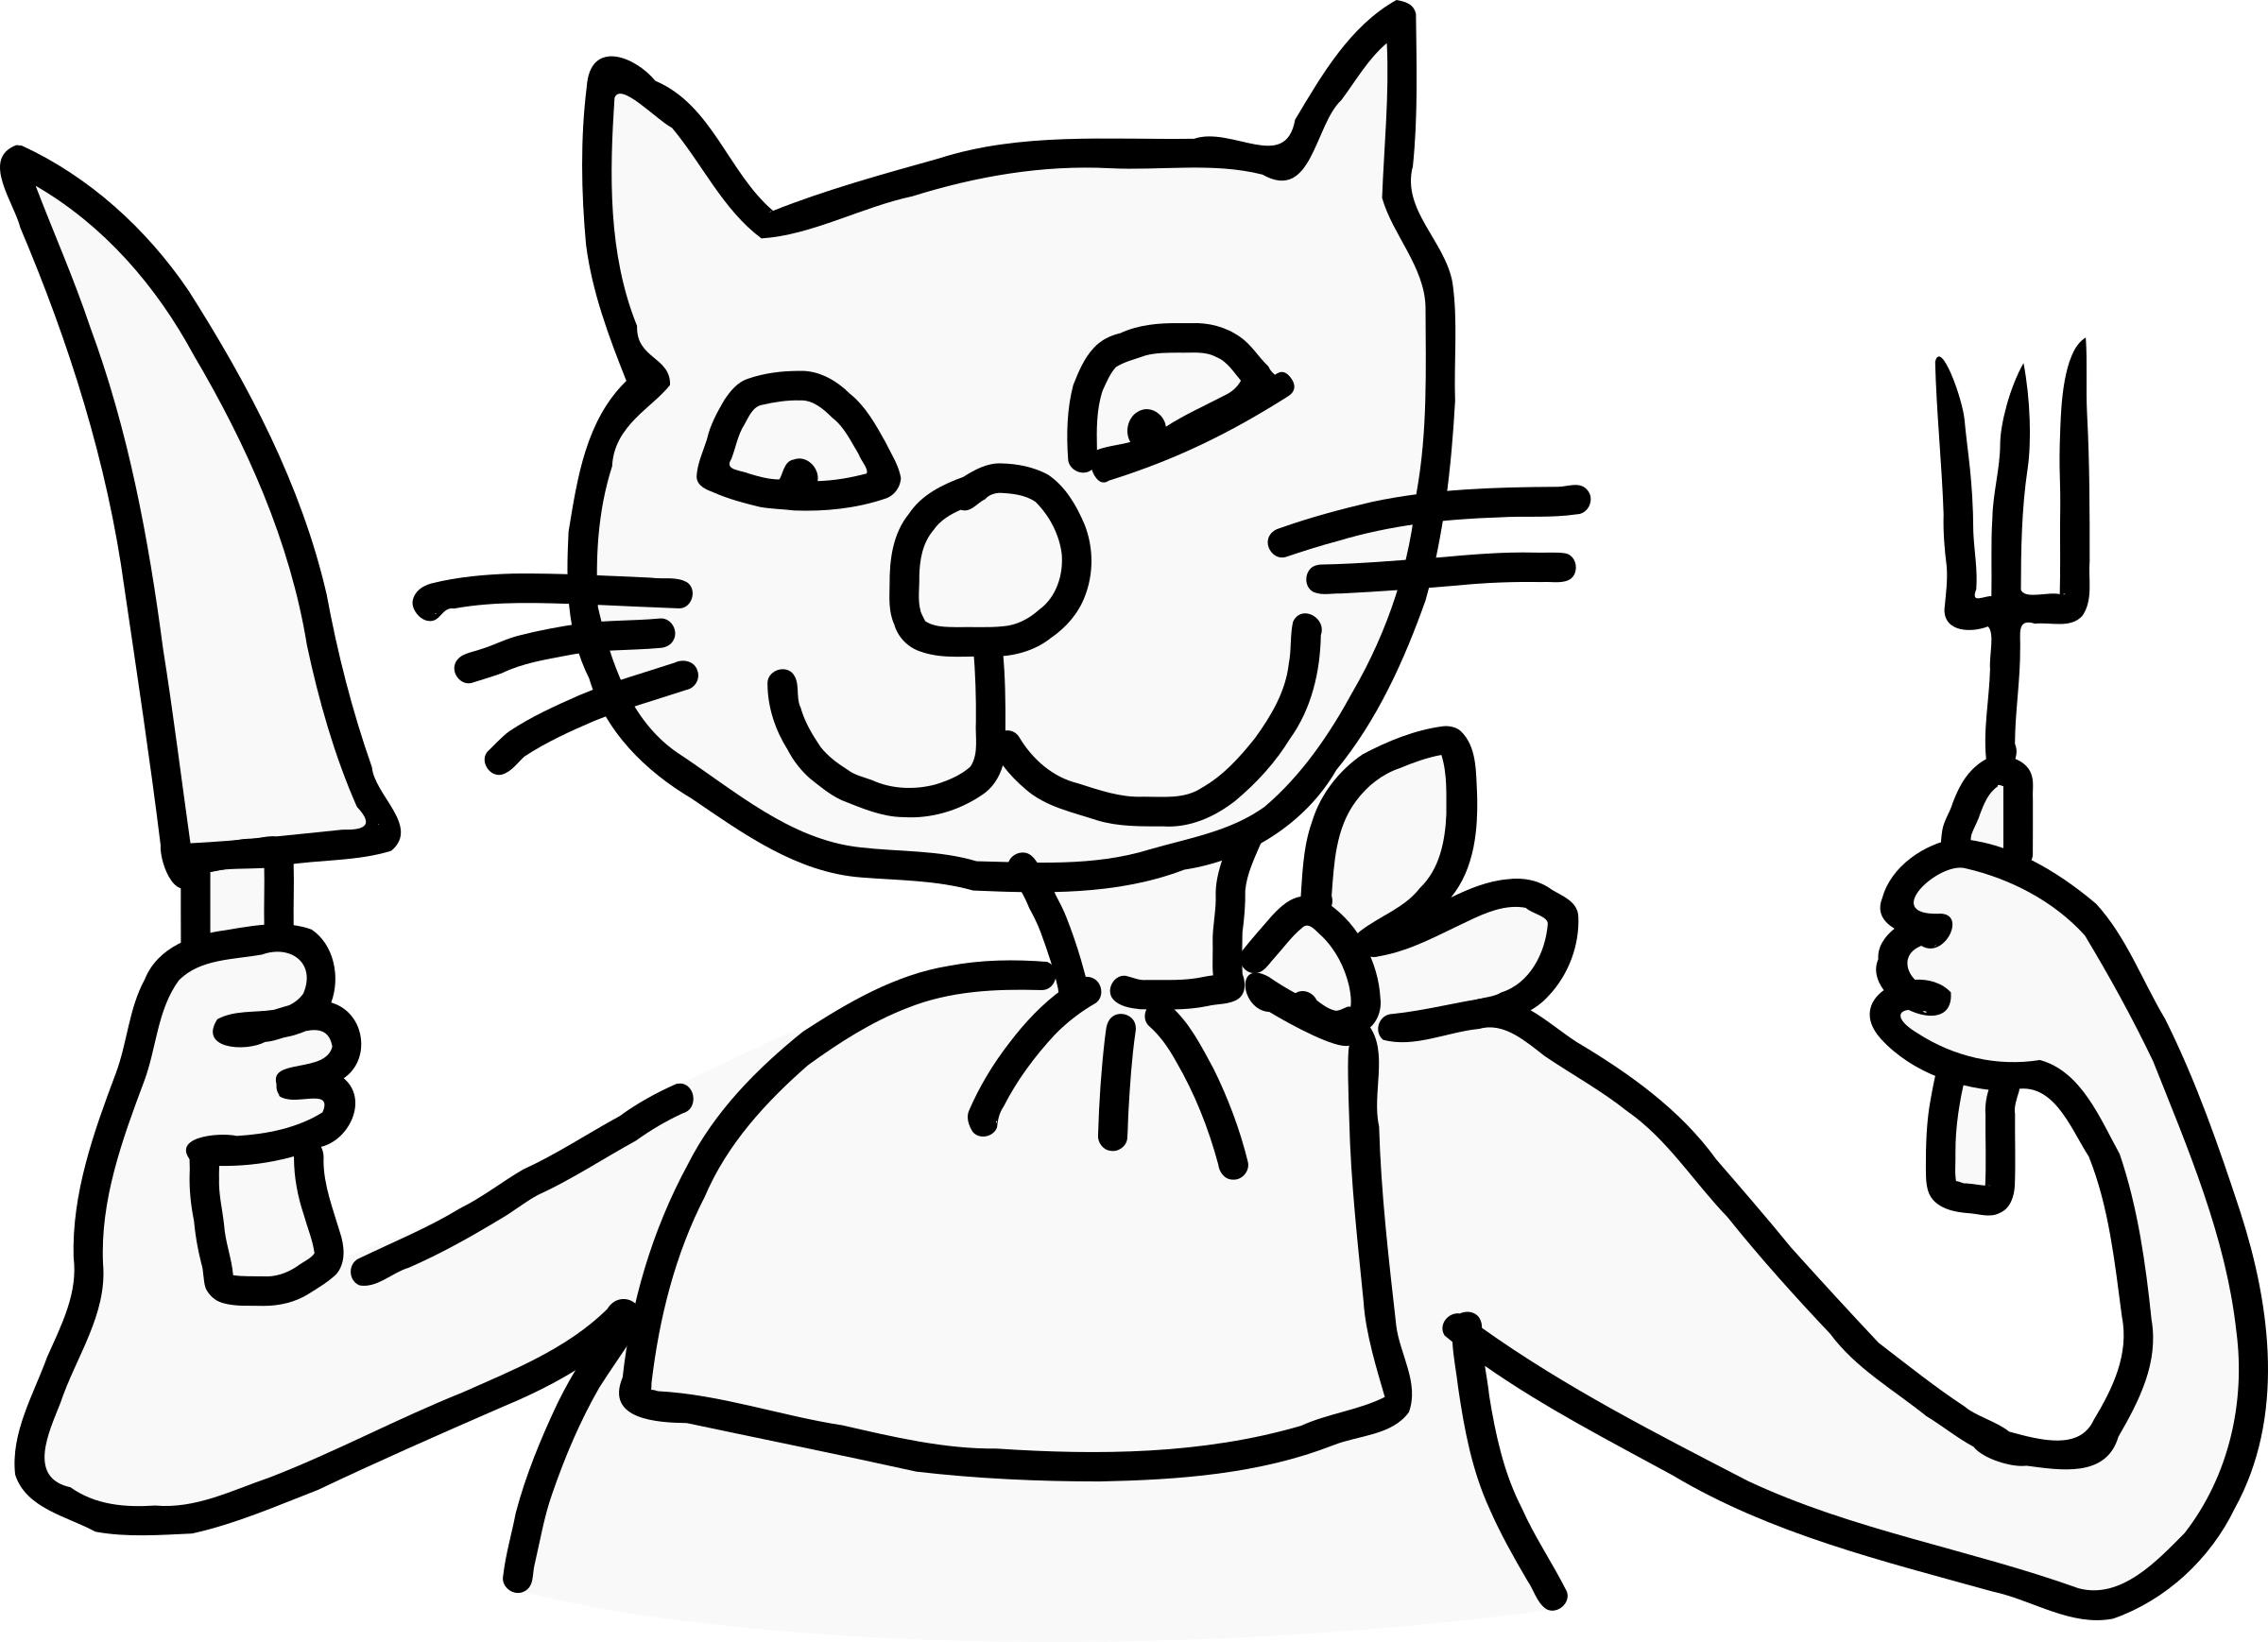 Eating cat png